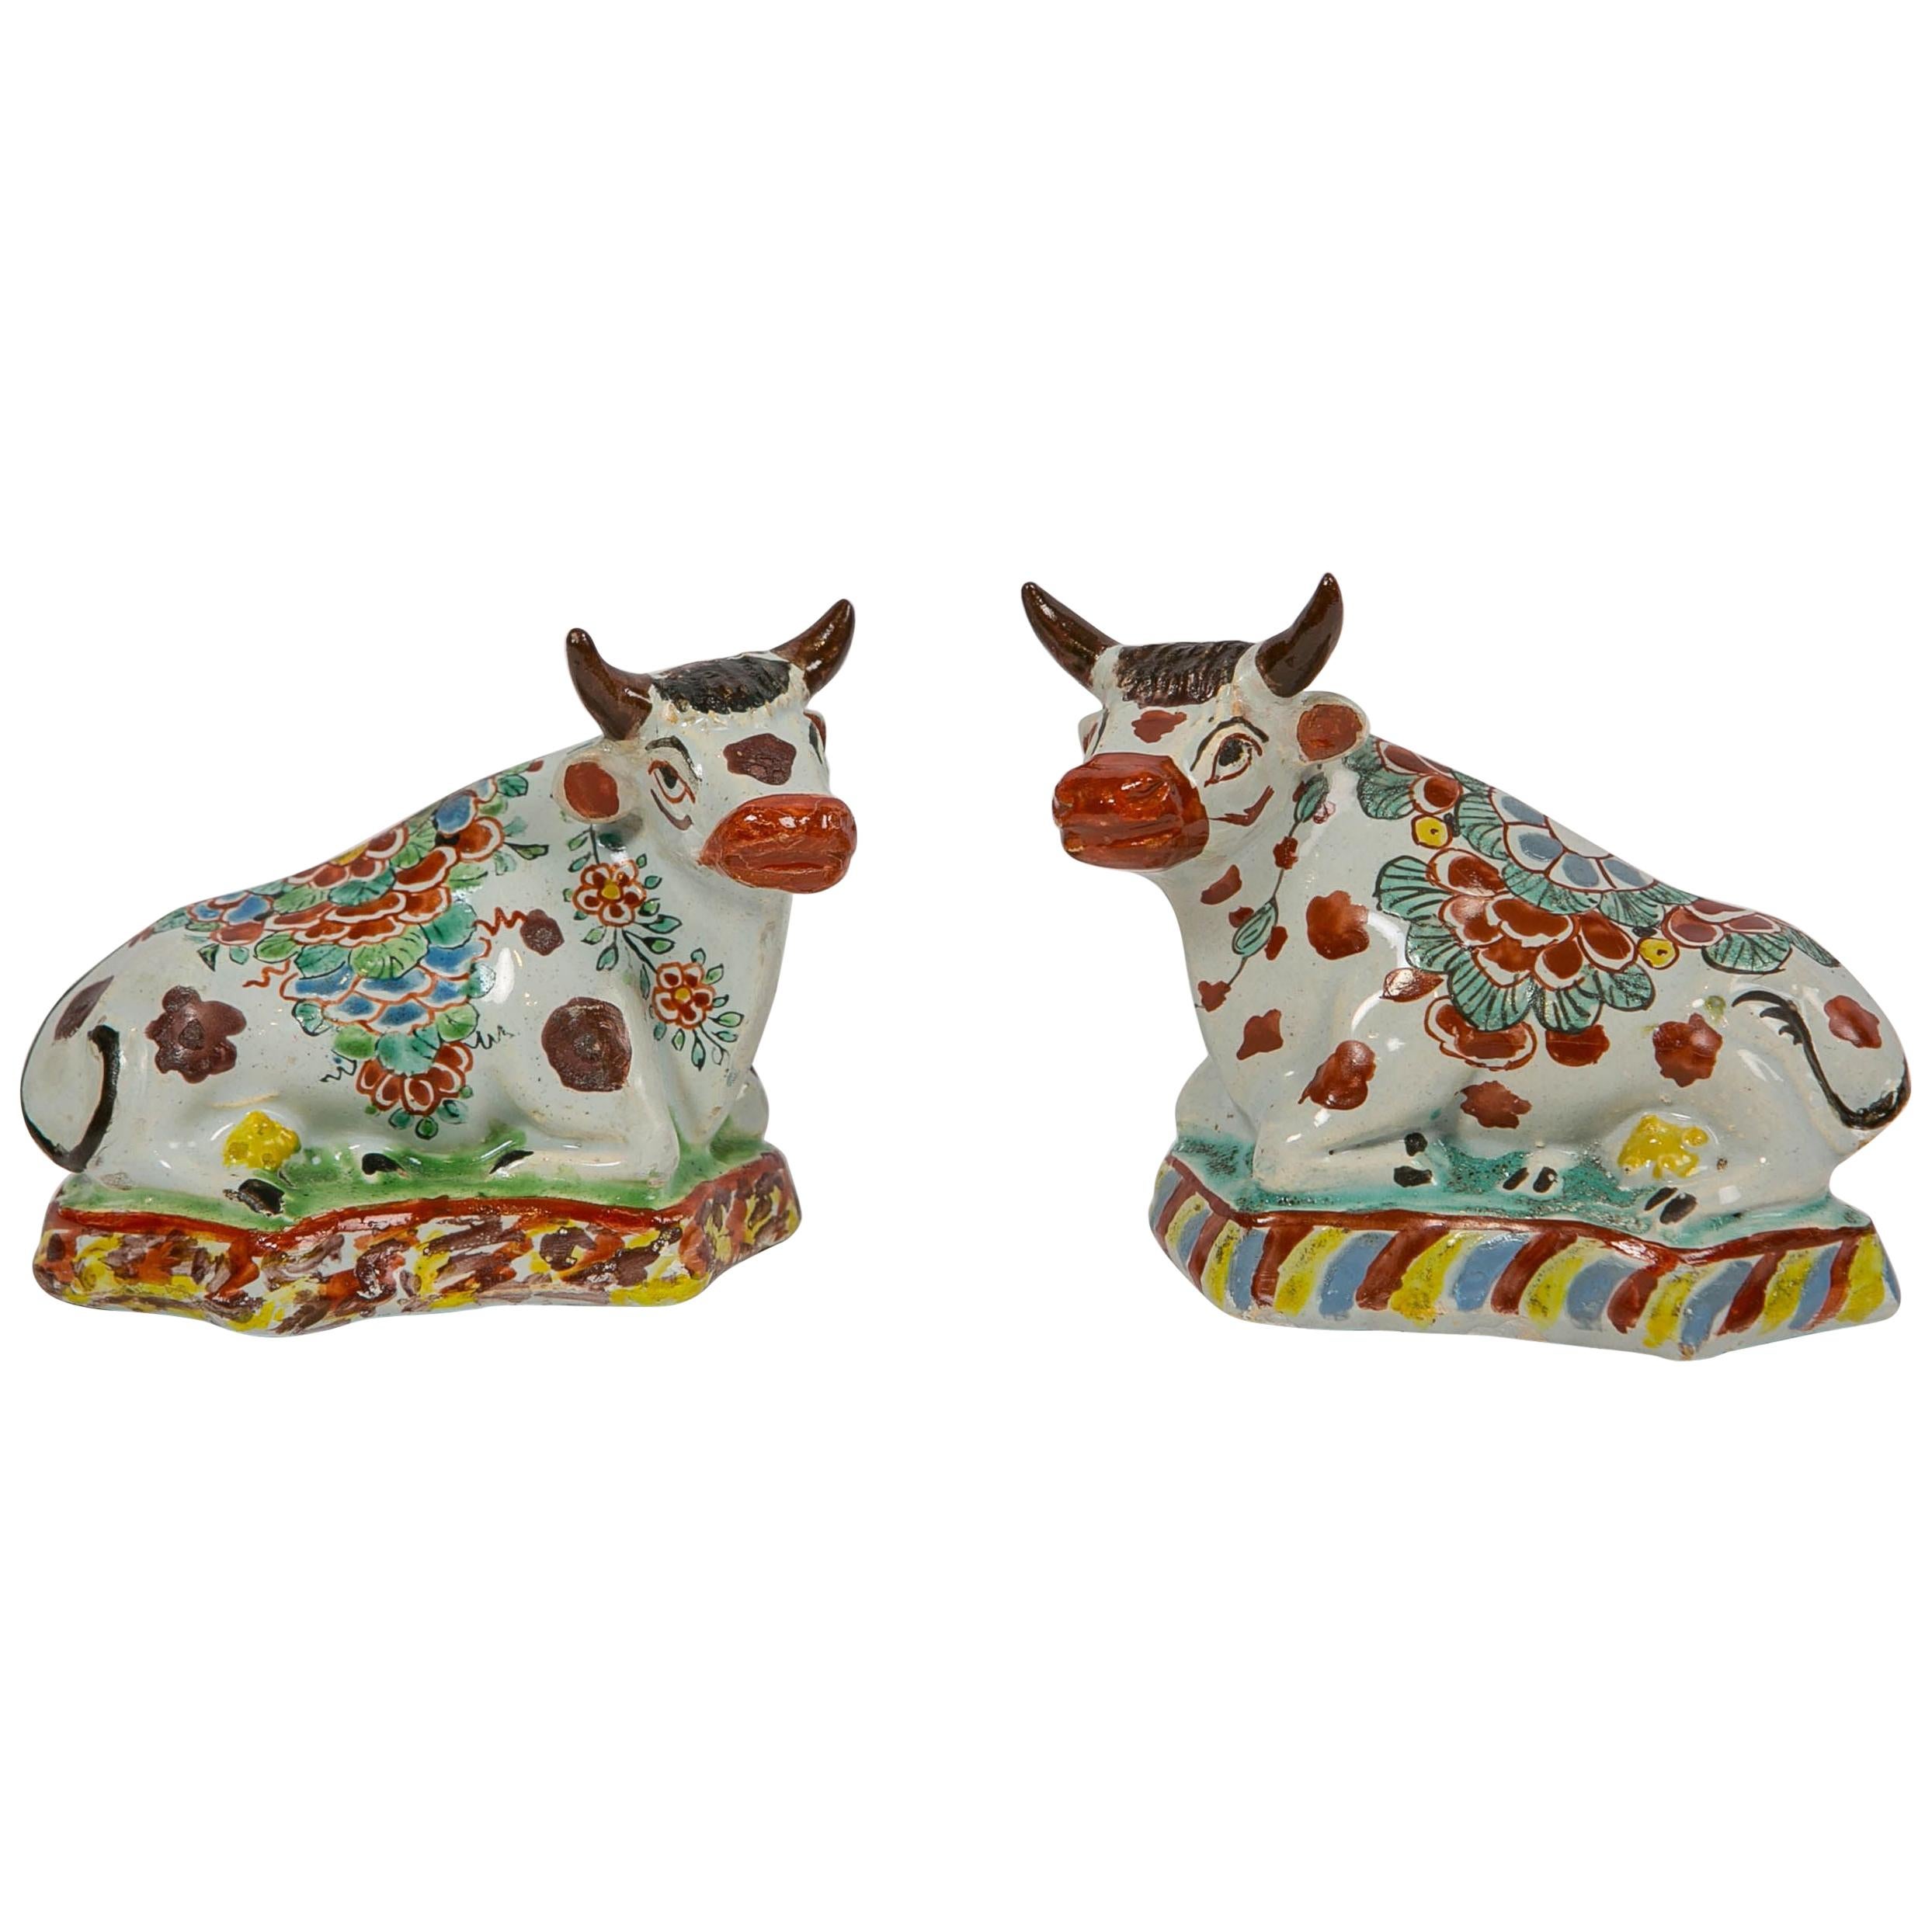 Pair of Dutch Delft Cows Painted in Polychrome Petit Feu Colors Made circa 1760